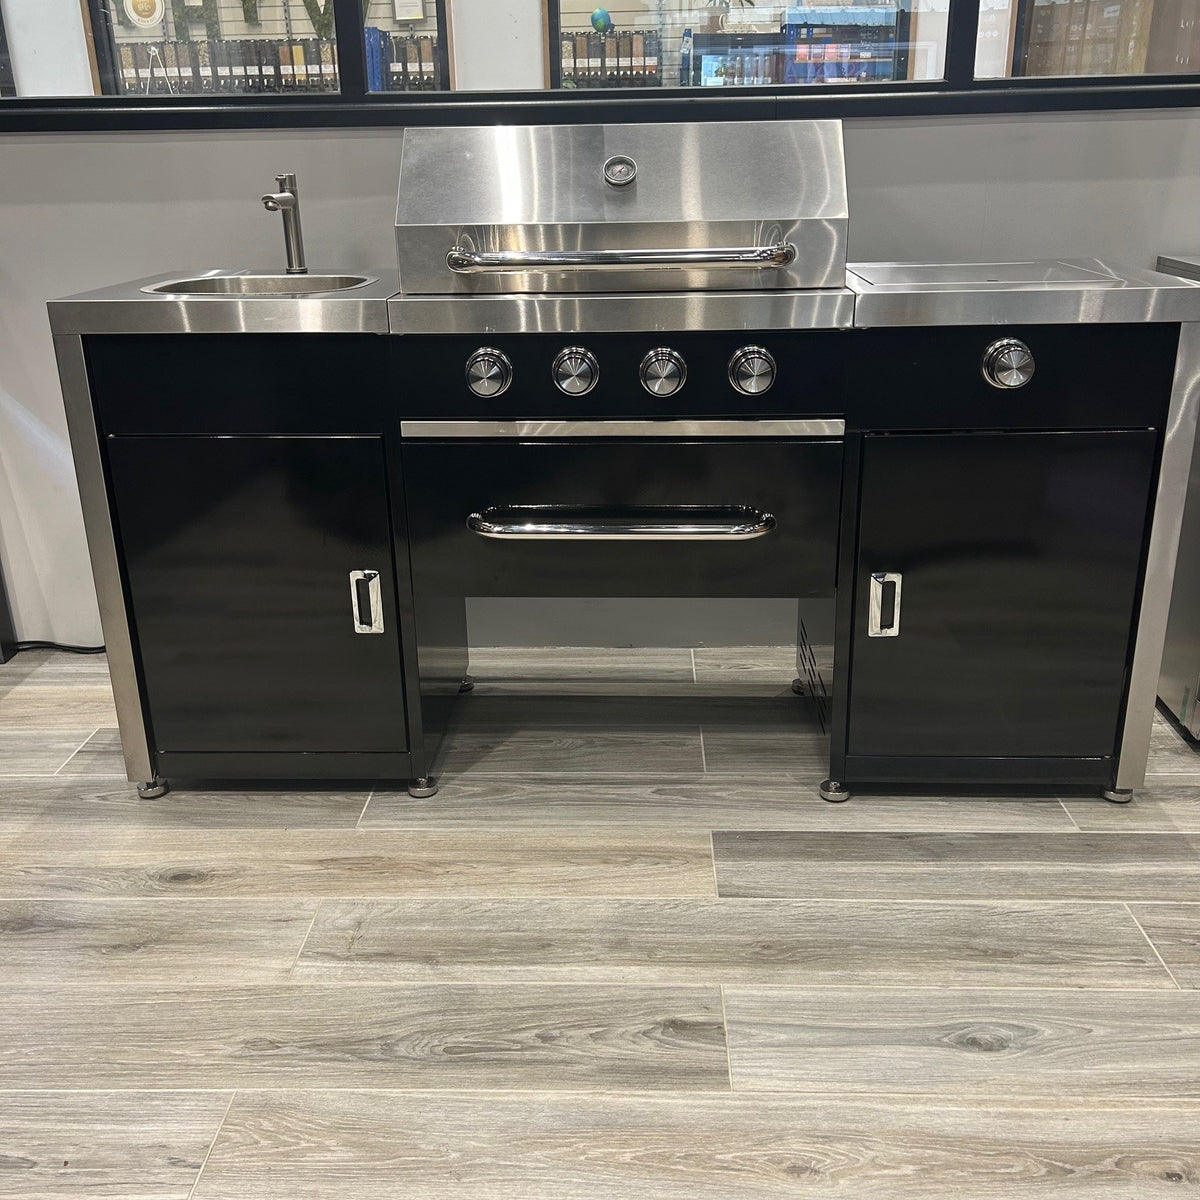 Ex Display Draco Grills Black 4 Burner Gas Barbecue Outdoor Kitchen Island with Sink and Side Burner